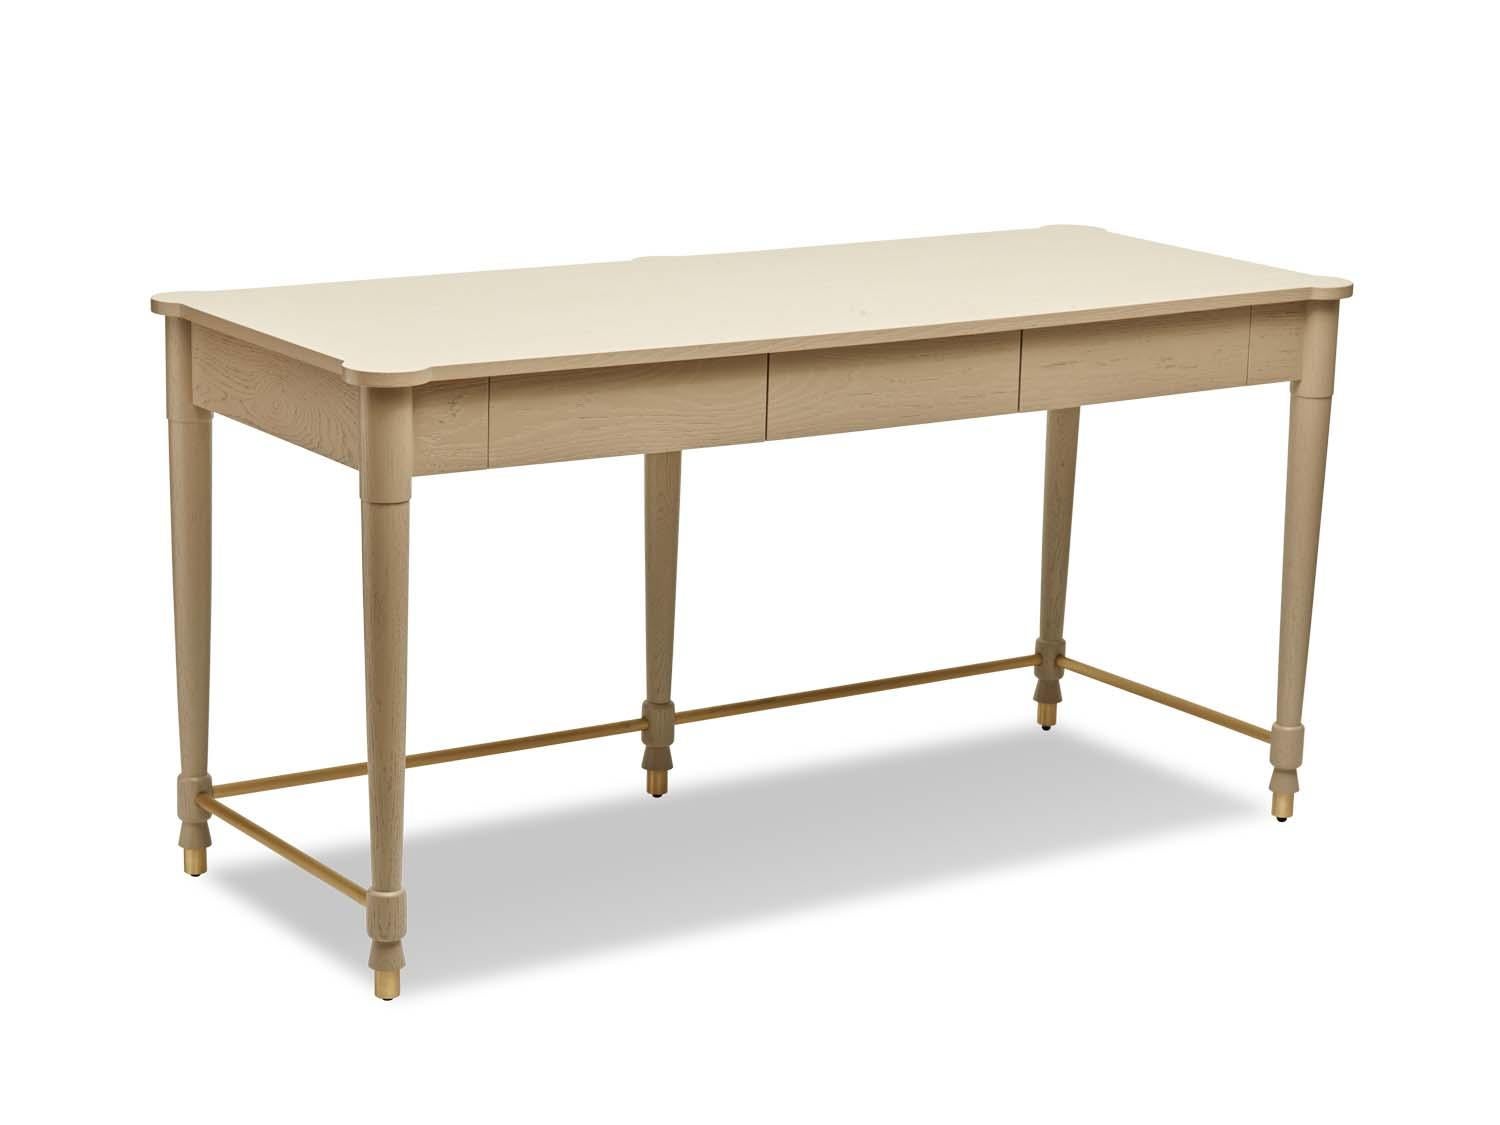 The Niguel desk features brass cap feet and a brass cross-stretcher with lacquered interior drawers. Shown here in Rocky Beach pigmented oak

The Lawson-Fenning Collection is designed and handmade in Los Angeles, California. Reach out to discover